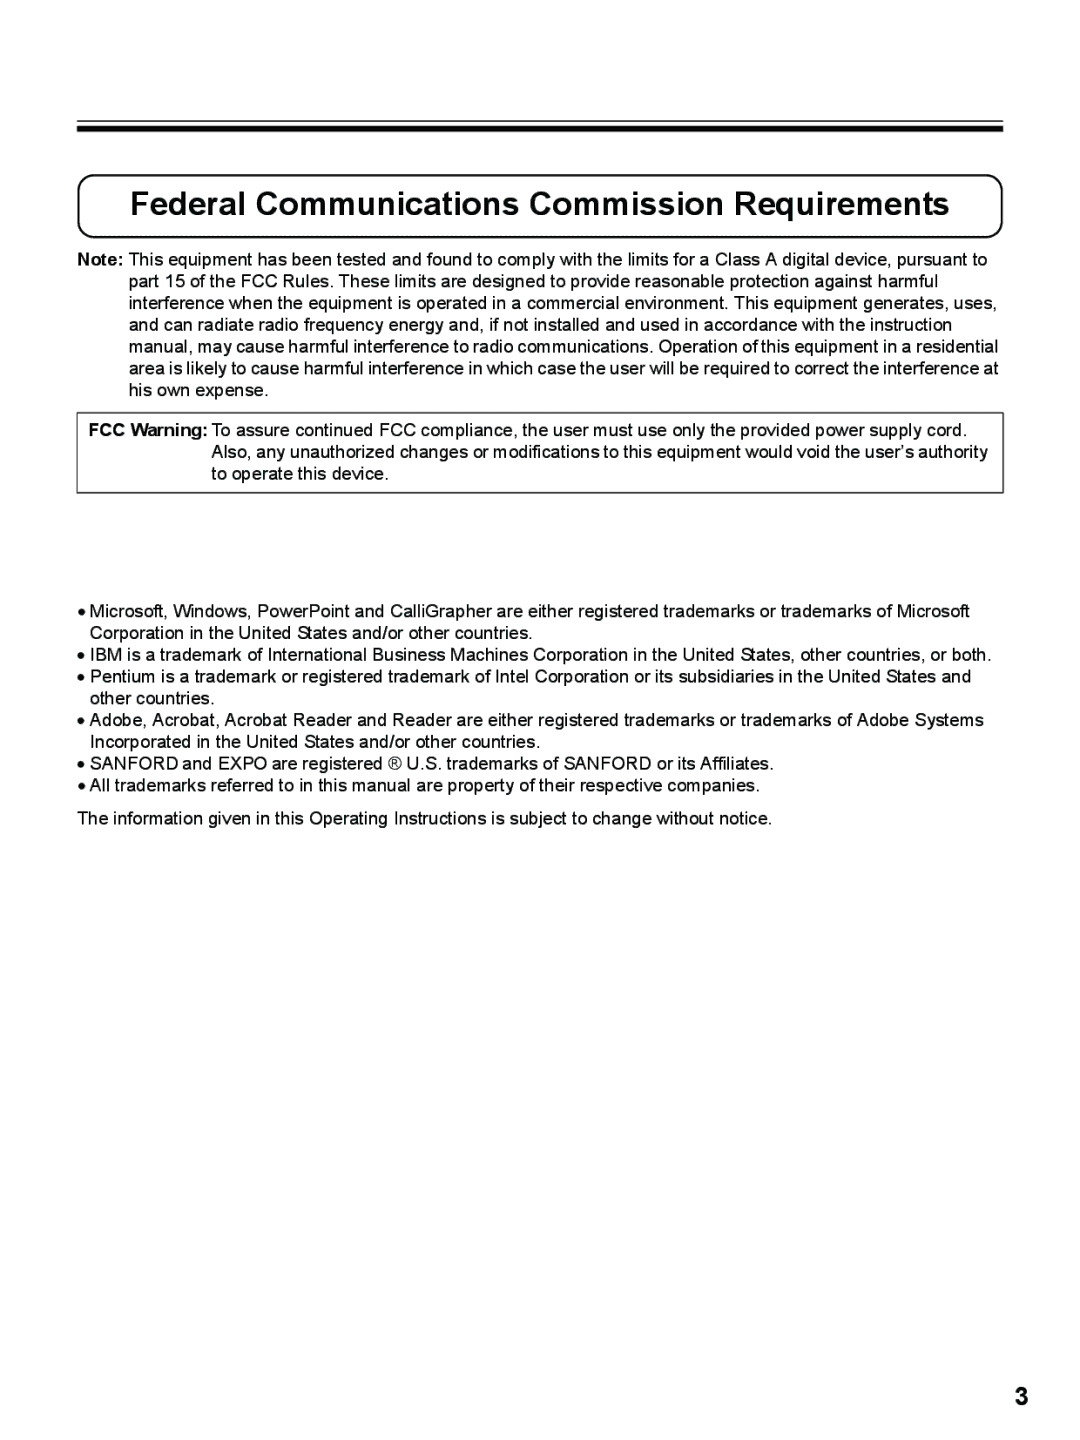 Panasonic UB-8325 operating instructions Federal Communications Commission Requirements 